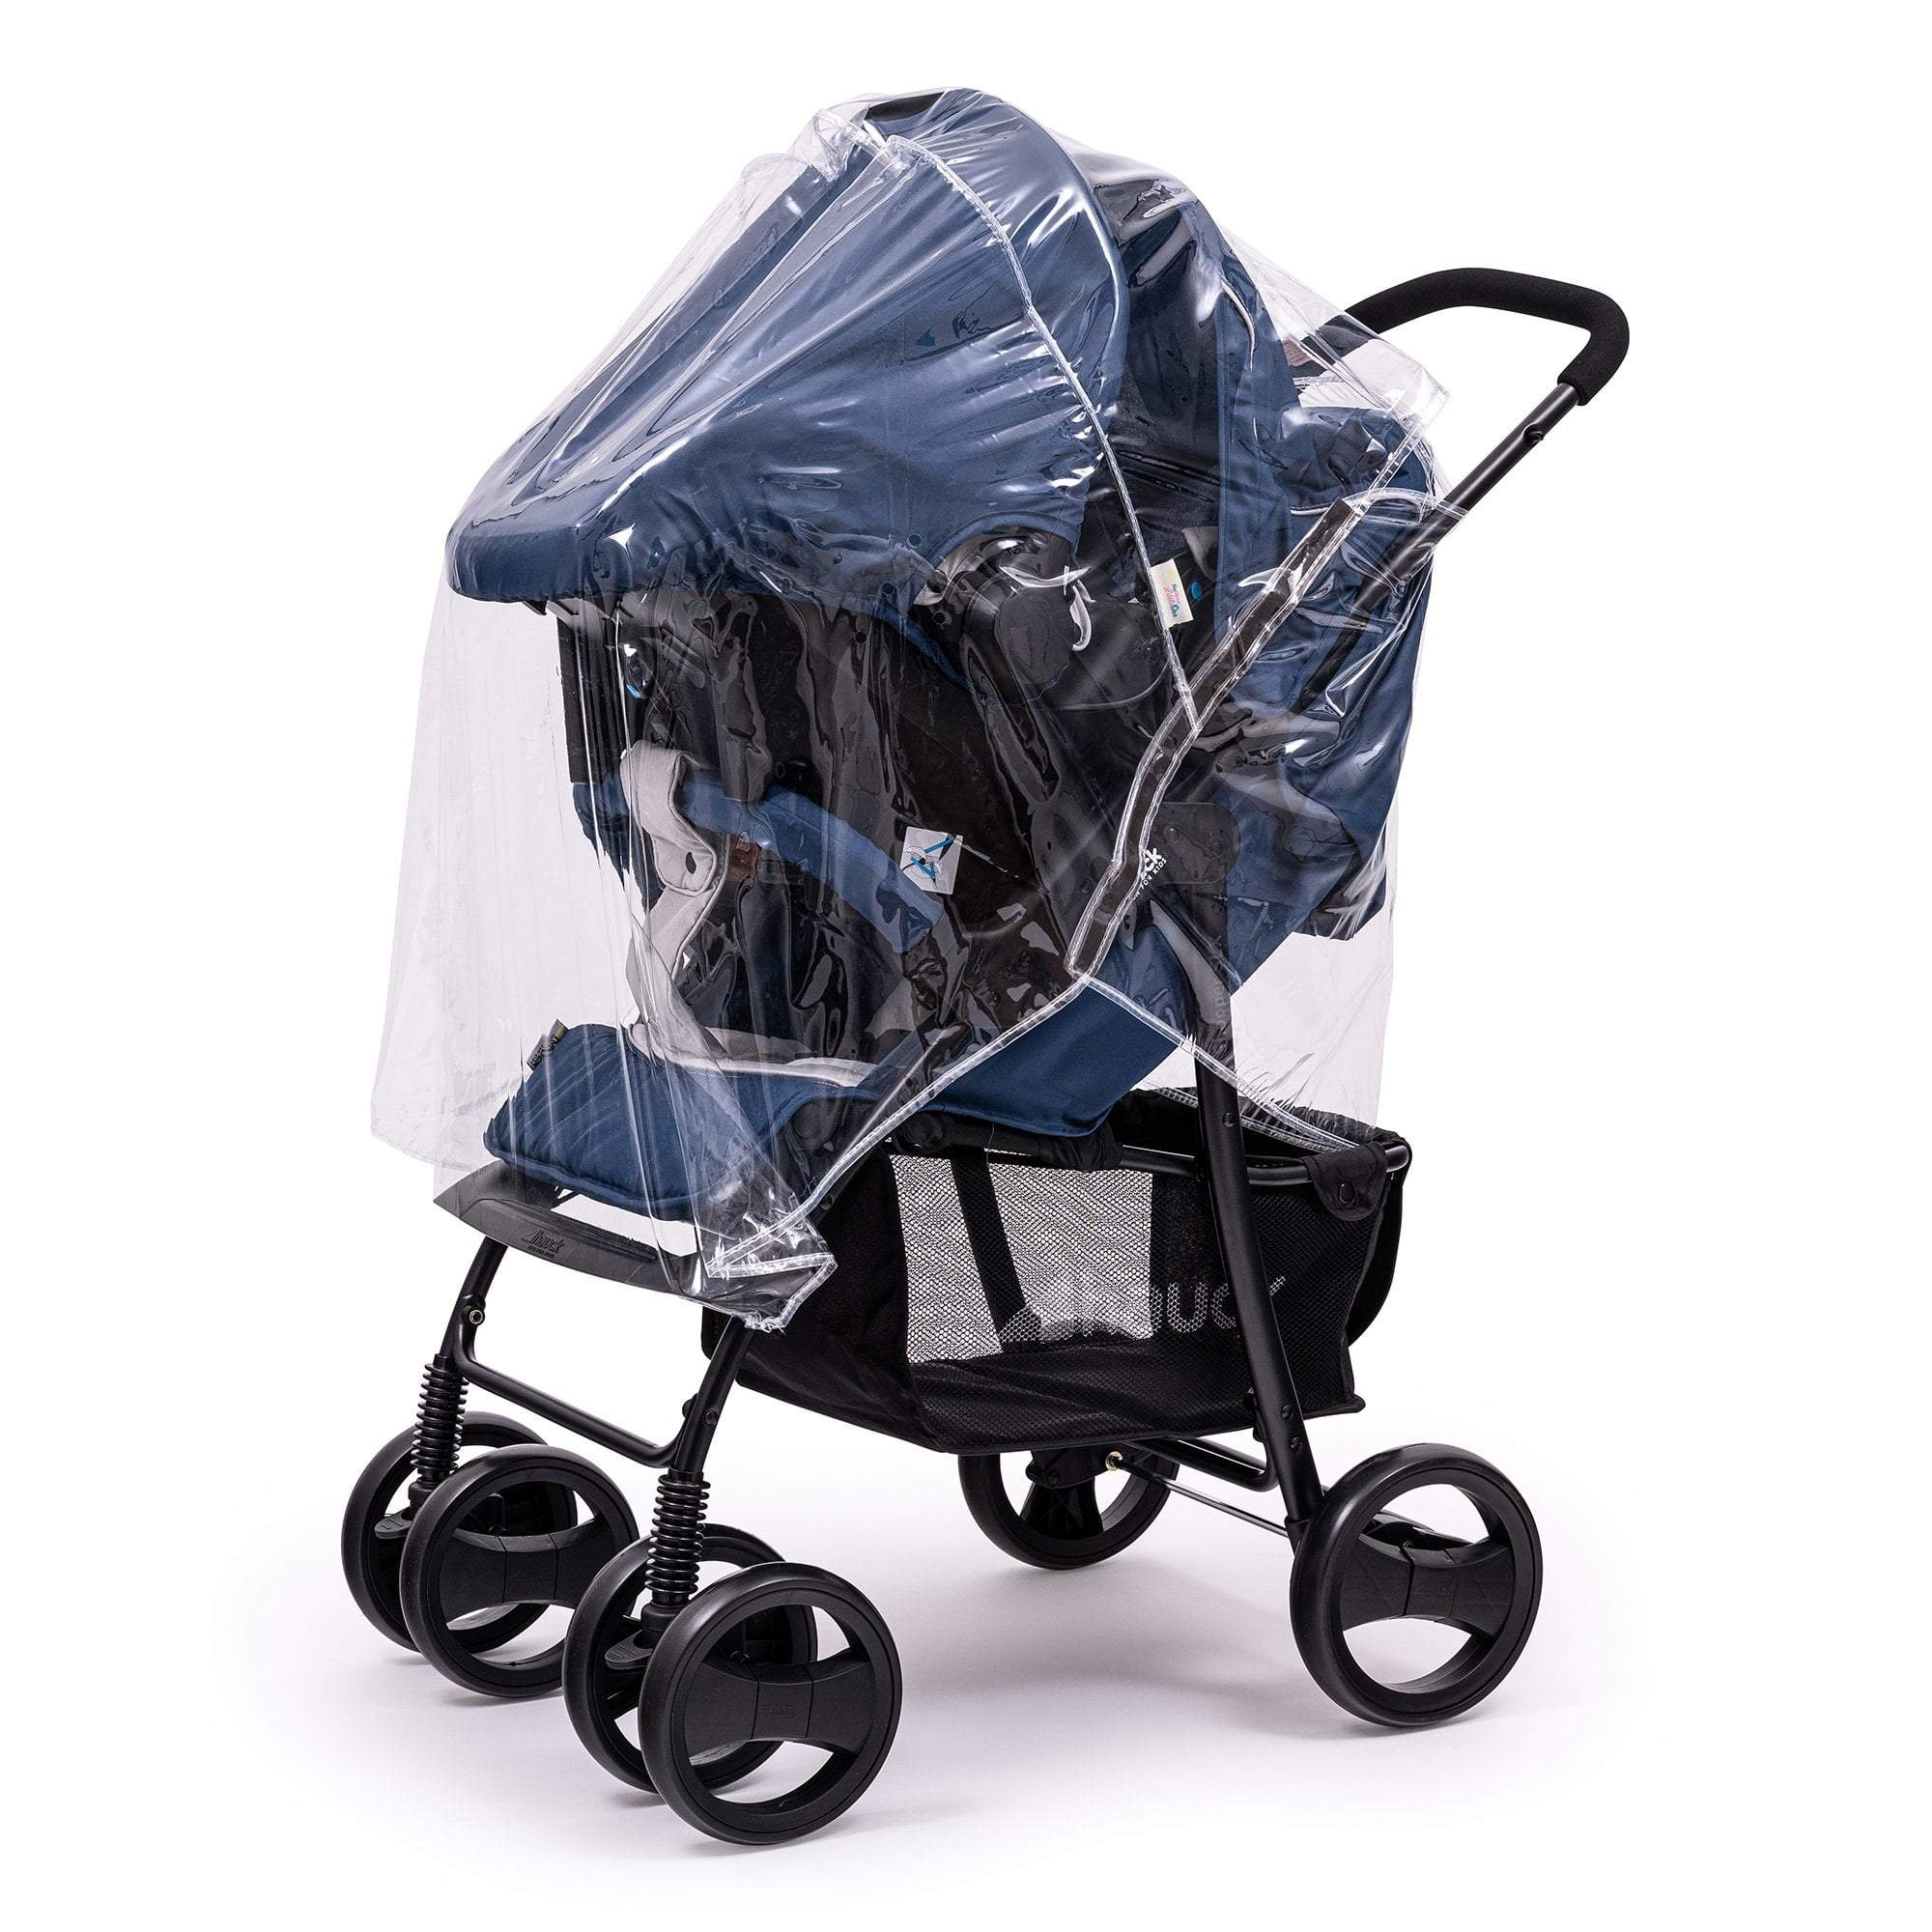 Travel System Raincover Compatible with Mothercare - Fits All Models - For Your Little One